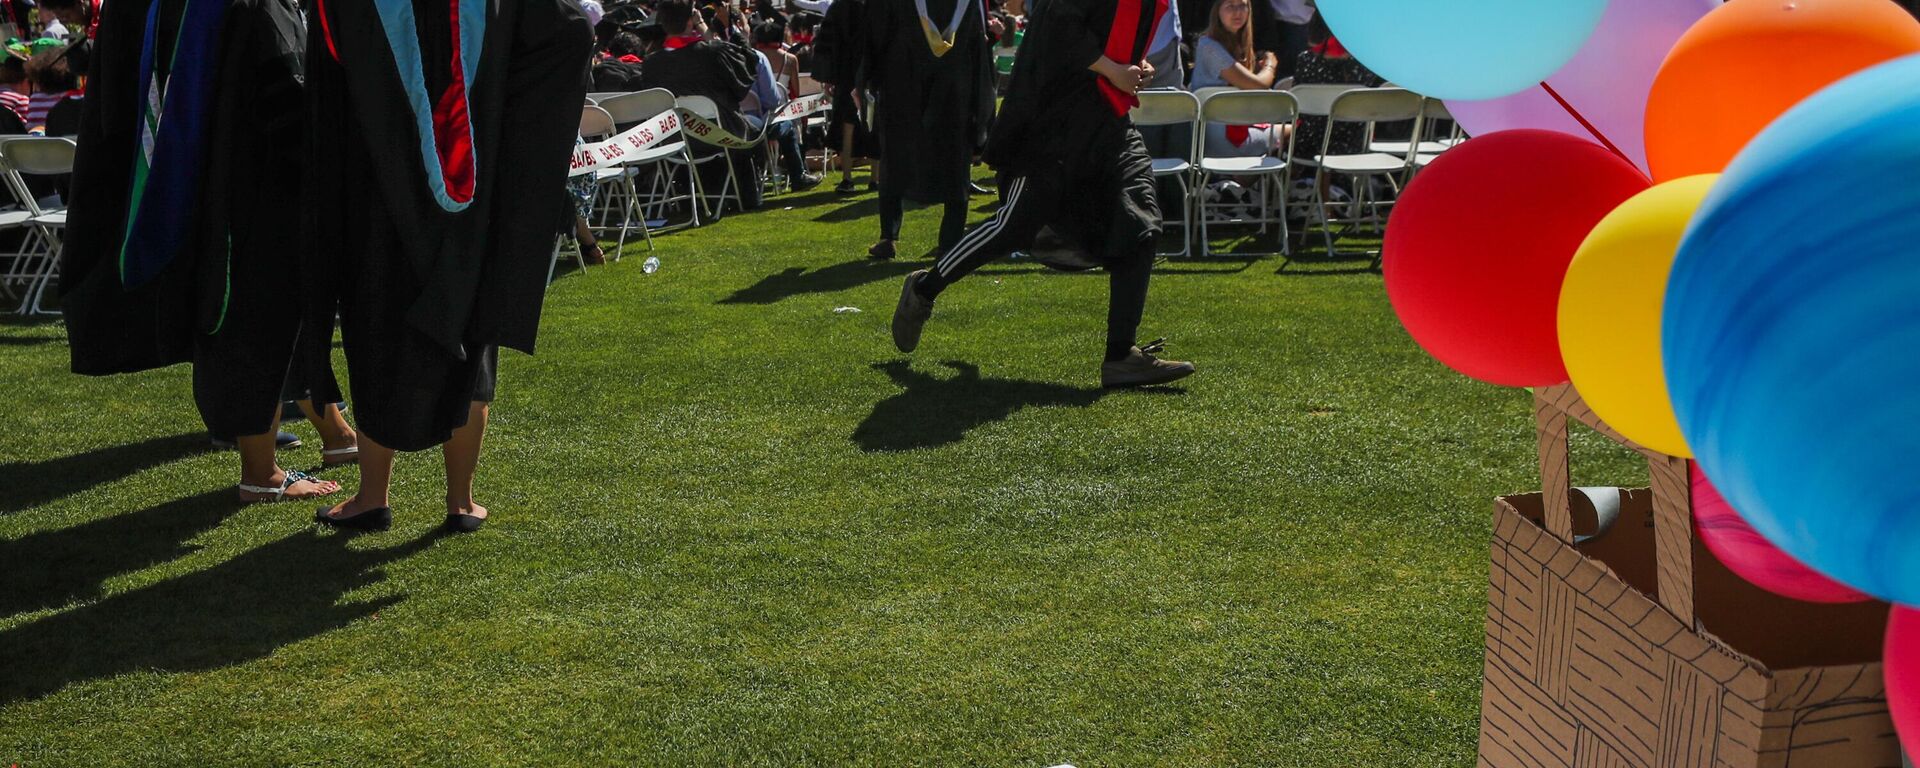 Students walk by a sign that lays on the ground that was made in support of a Stanford rape victim, during graduation ceremonies at Stanford University, in Palo Alto, California, on June 12, 2016.  - Sputnik International, 1920, 21.12.2022